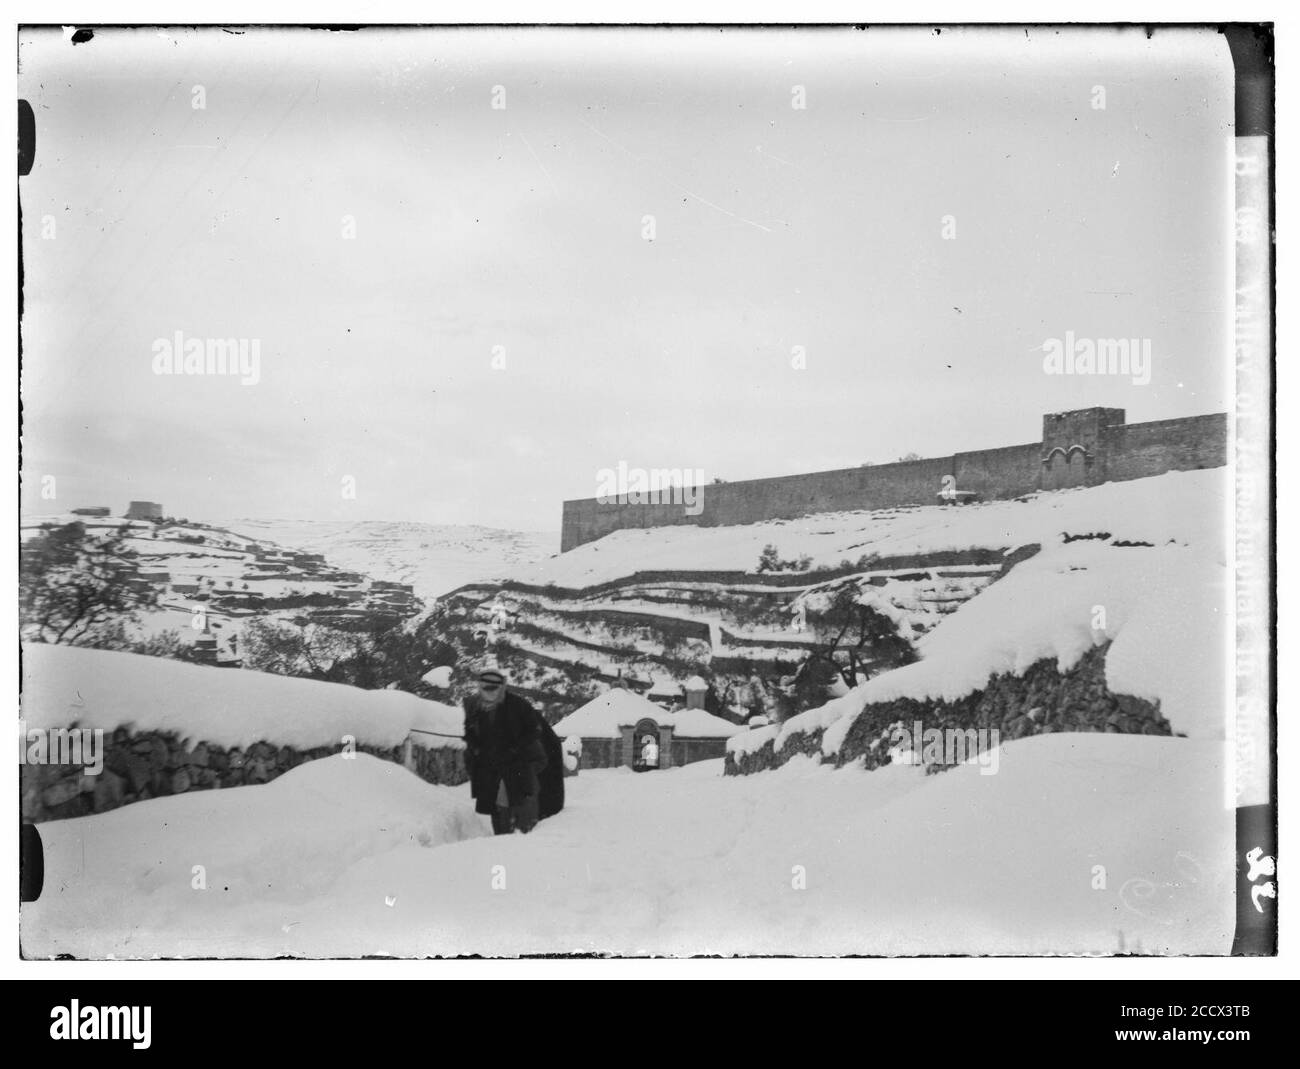 Jerusalem during a snowy winter. Valley of Jehoshaphat in snow Stock Photo